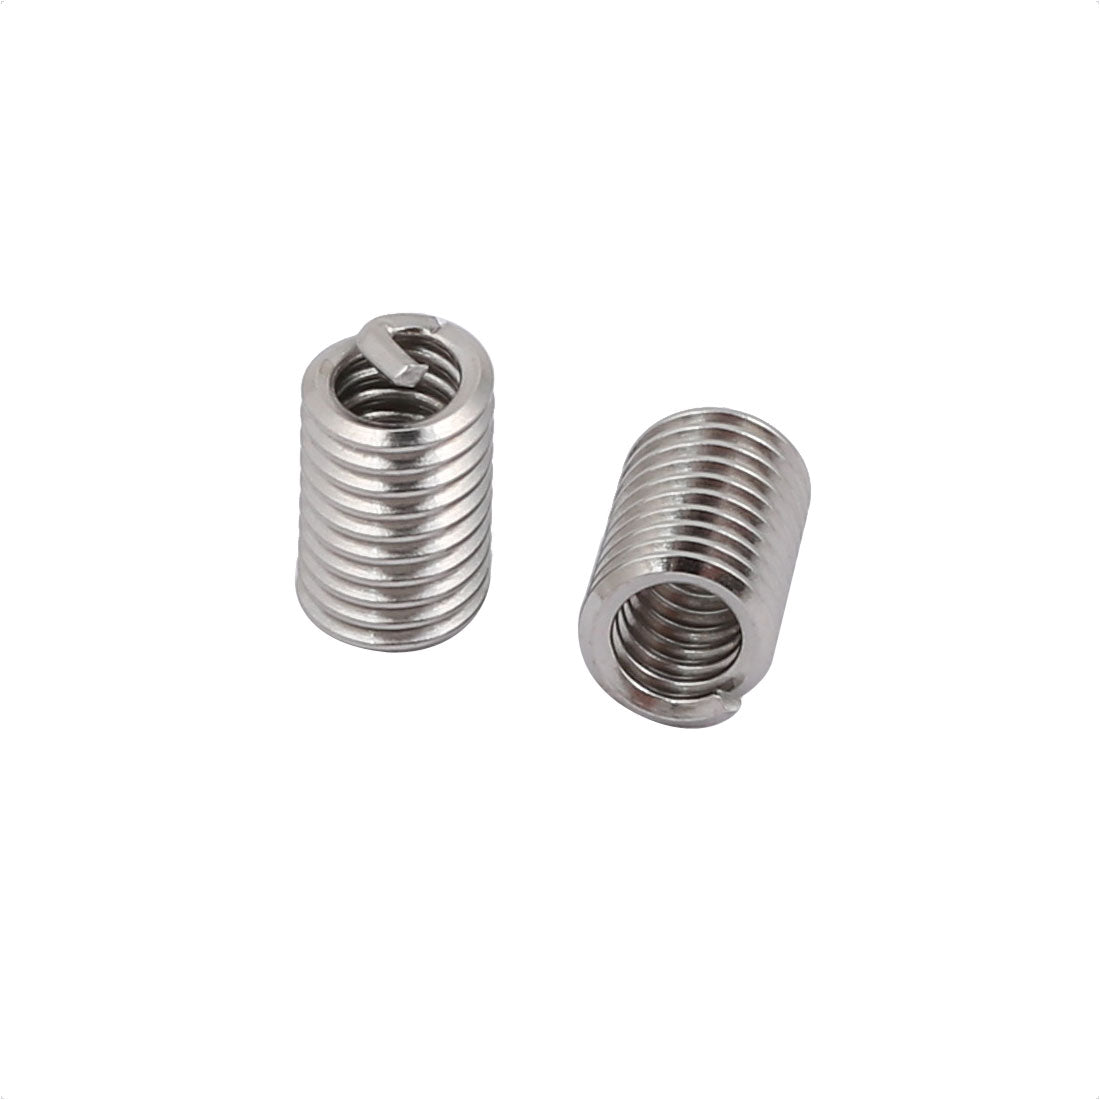 uxcell Uxcell #6-32 x 3D (0.414") 304 Stainless Steel Helical Coil Wire Thread Insert 25pcs